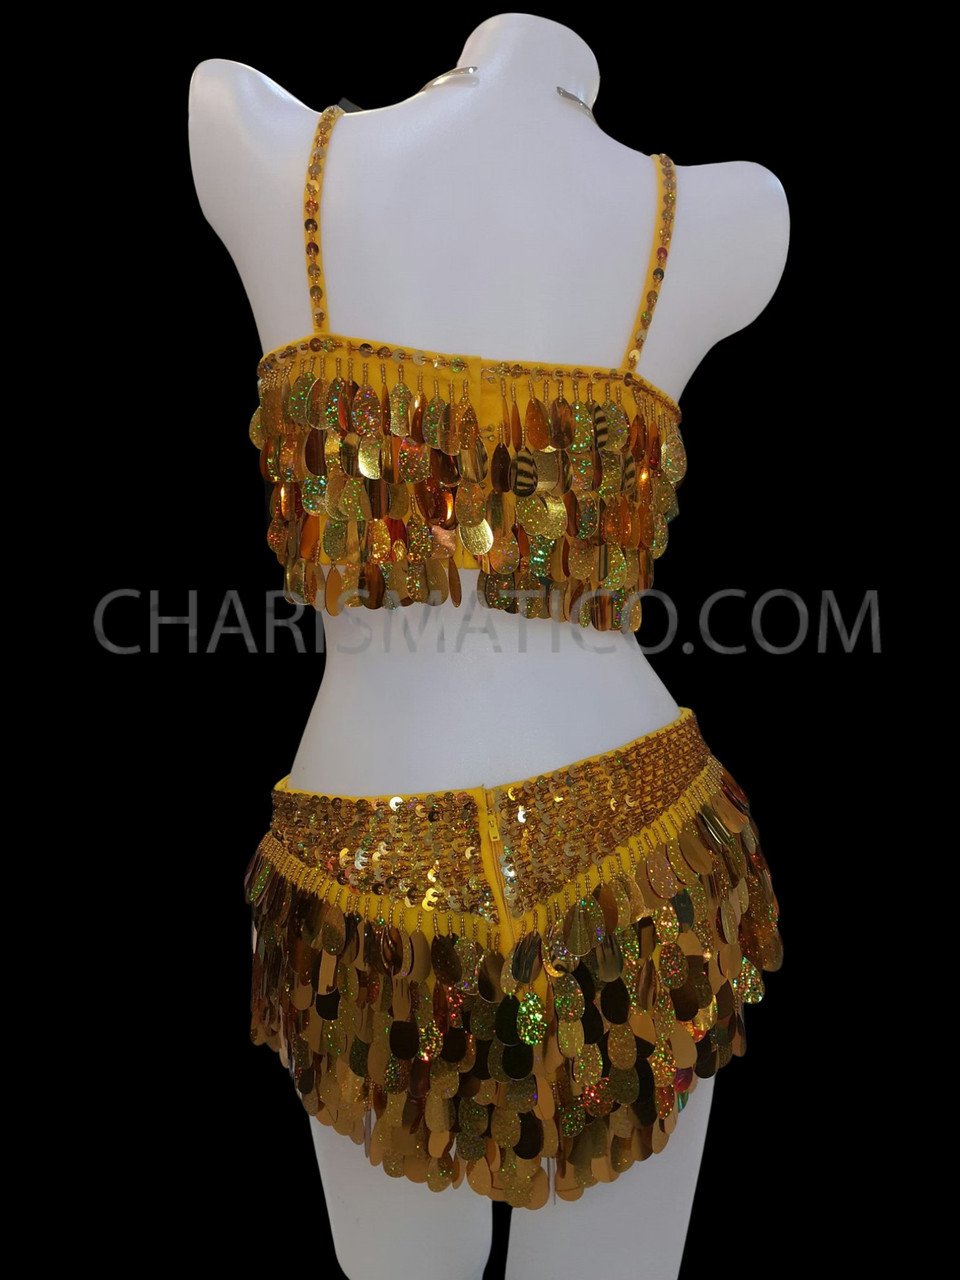 Glam Gold Bra And Skirt Sequin Showgirl Costume